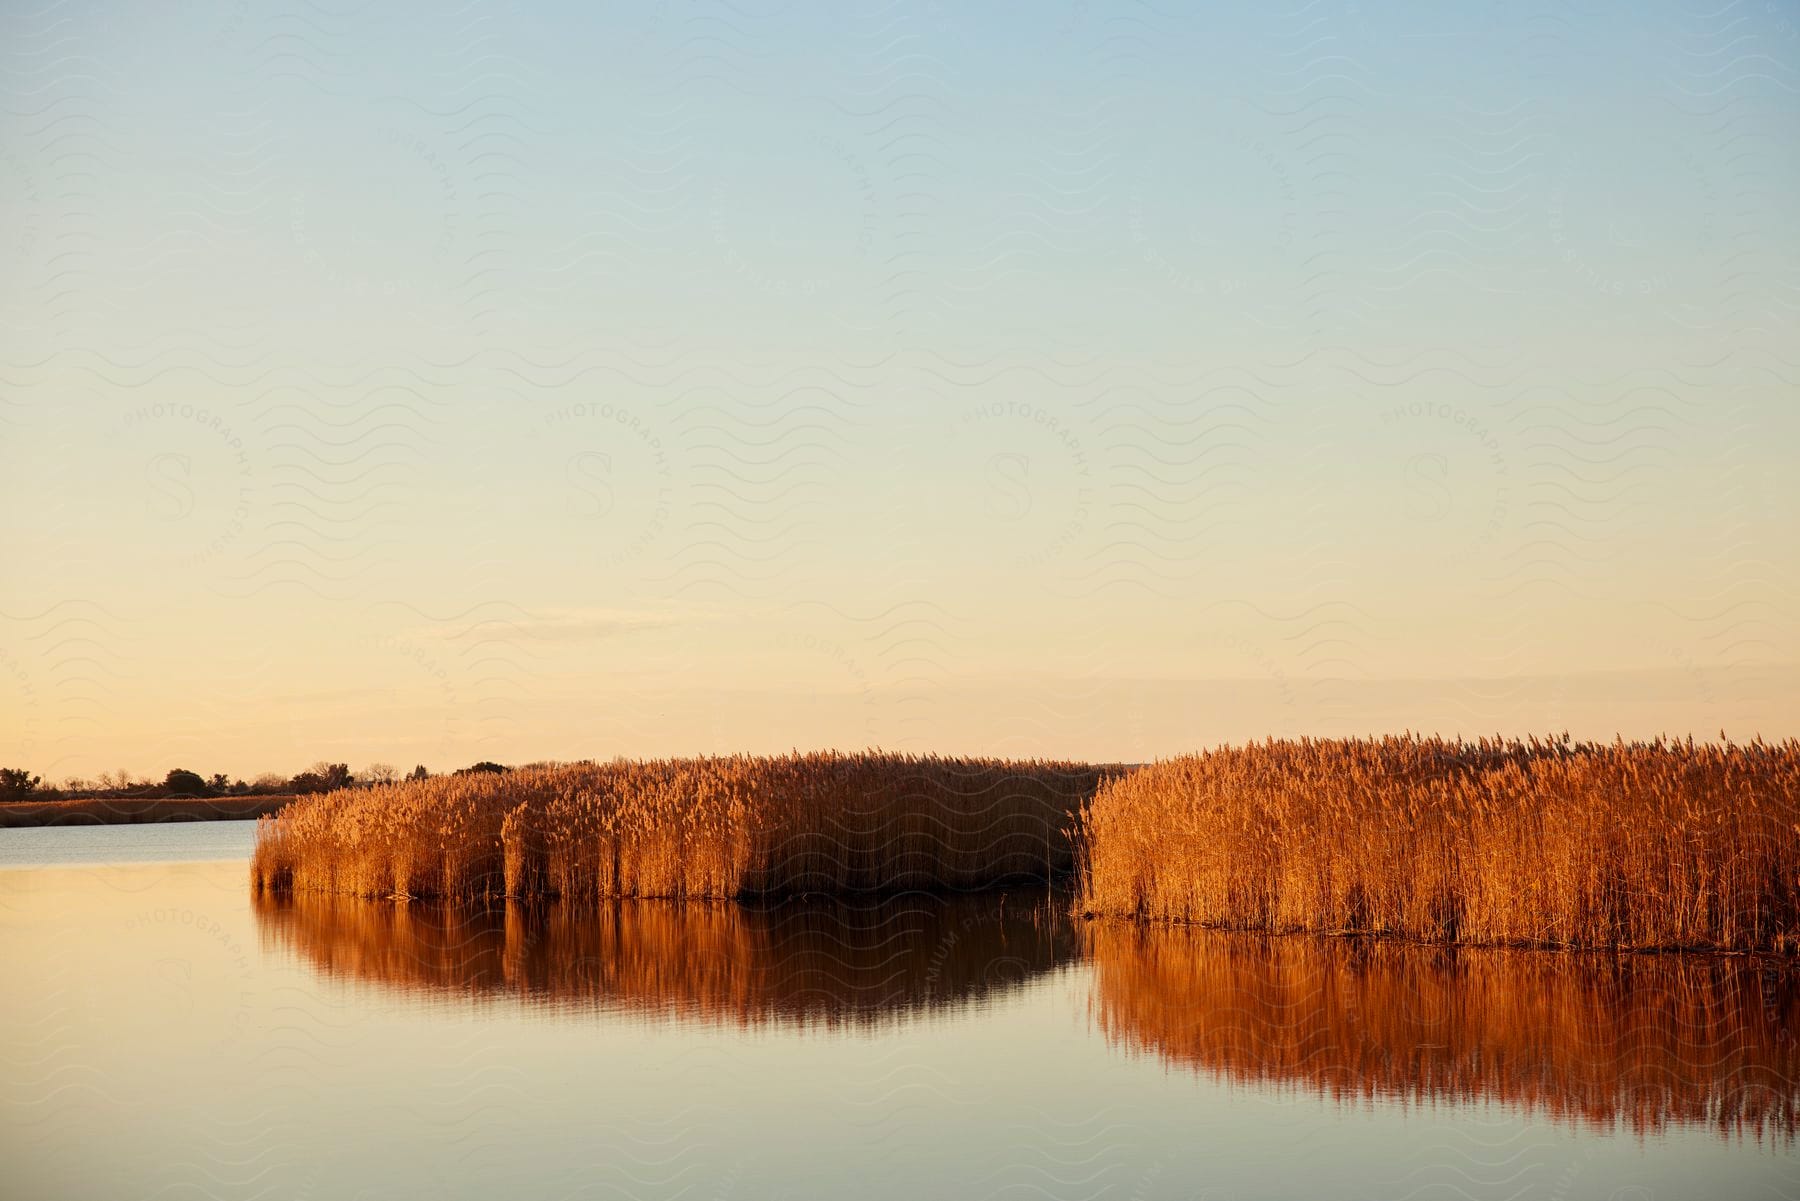 Lake with reeds at sunset.